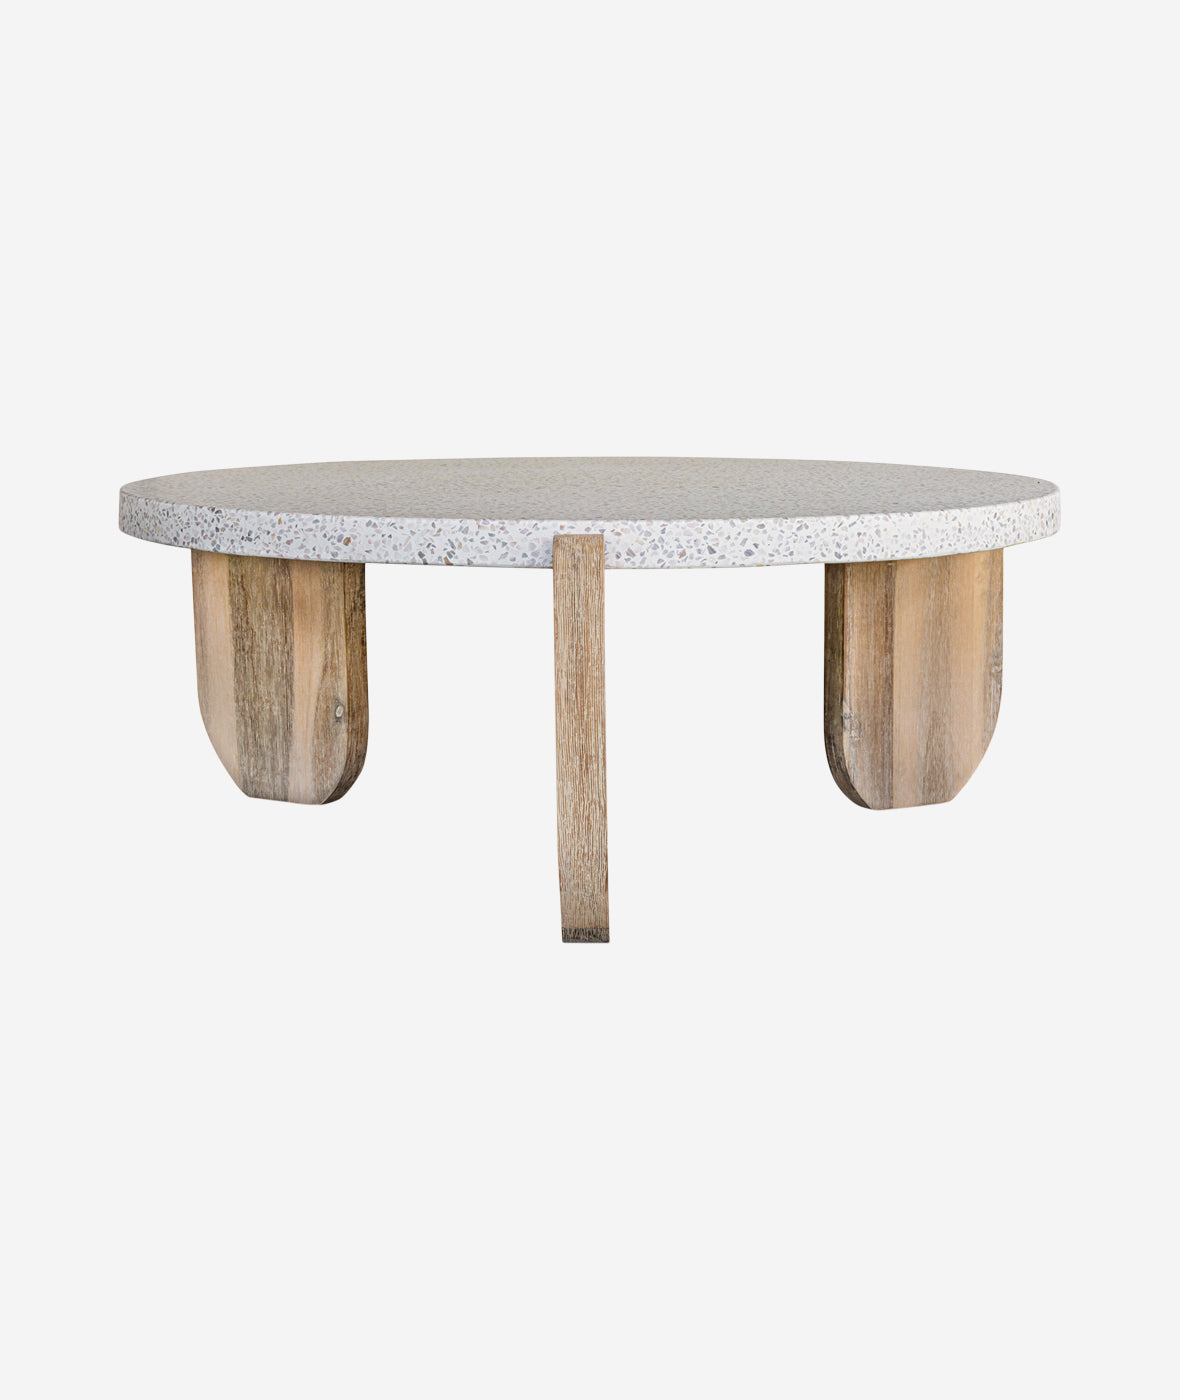 Wunder Coffee Table - More Options